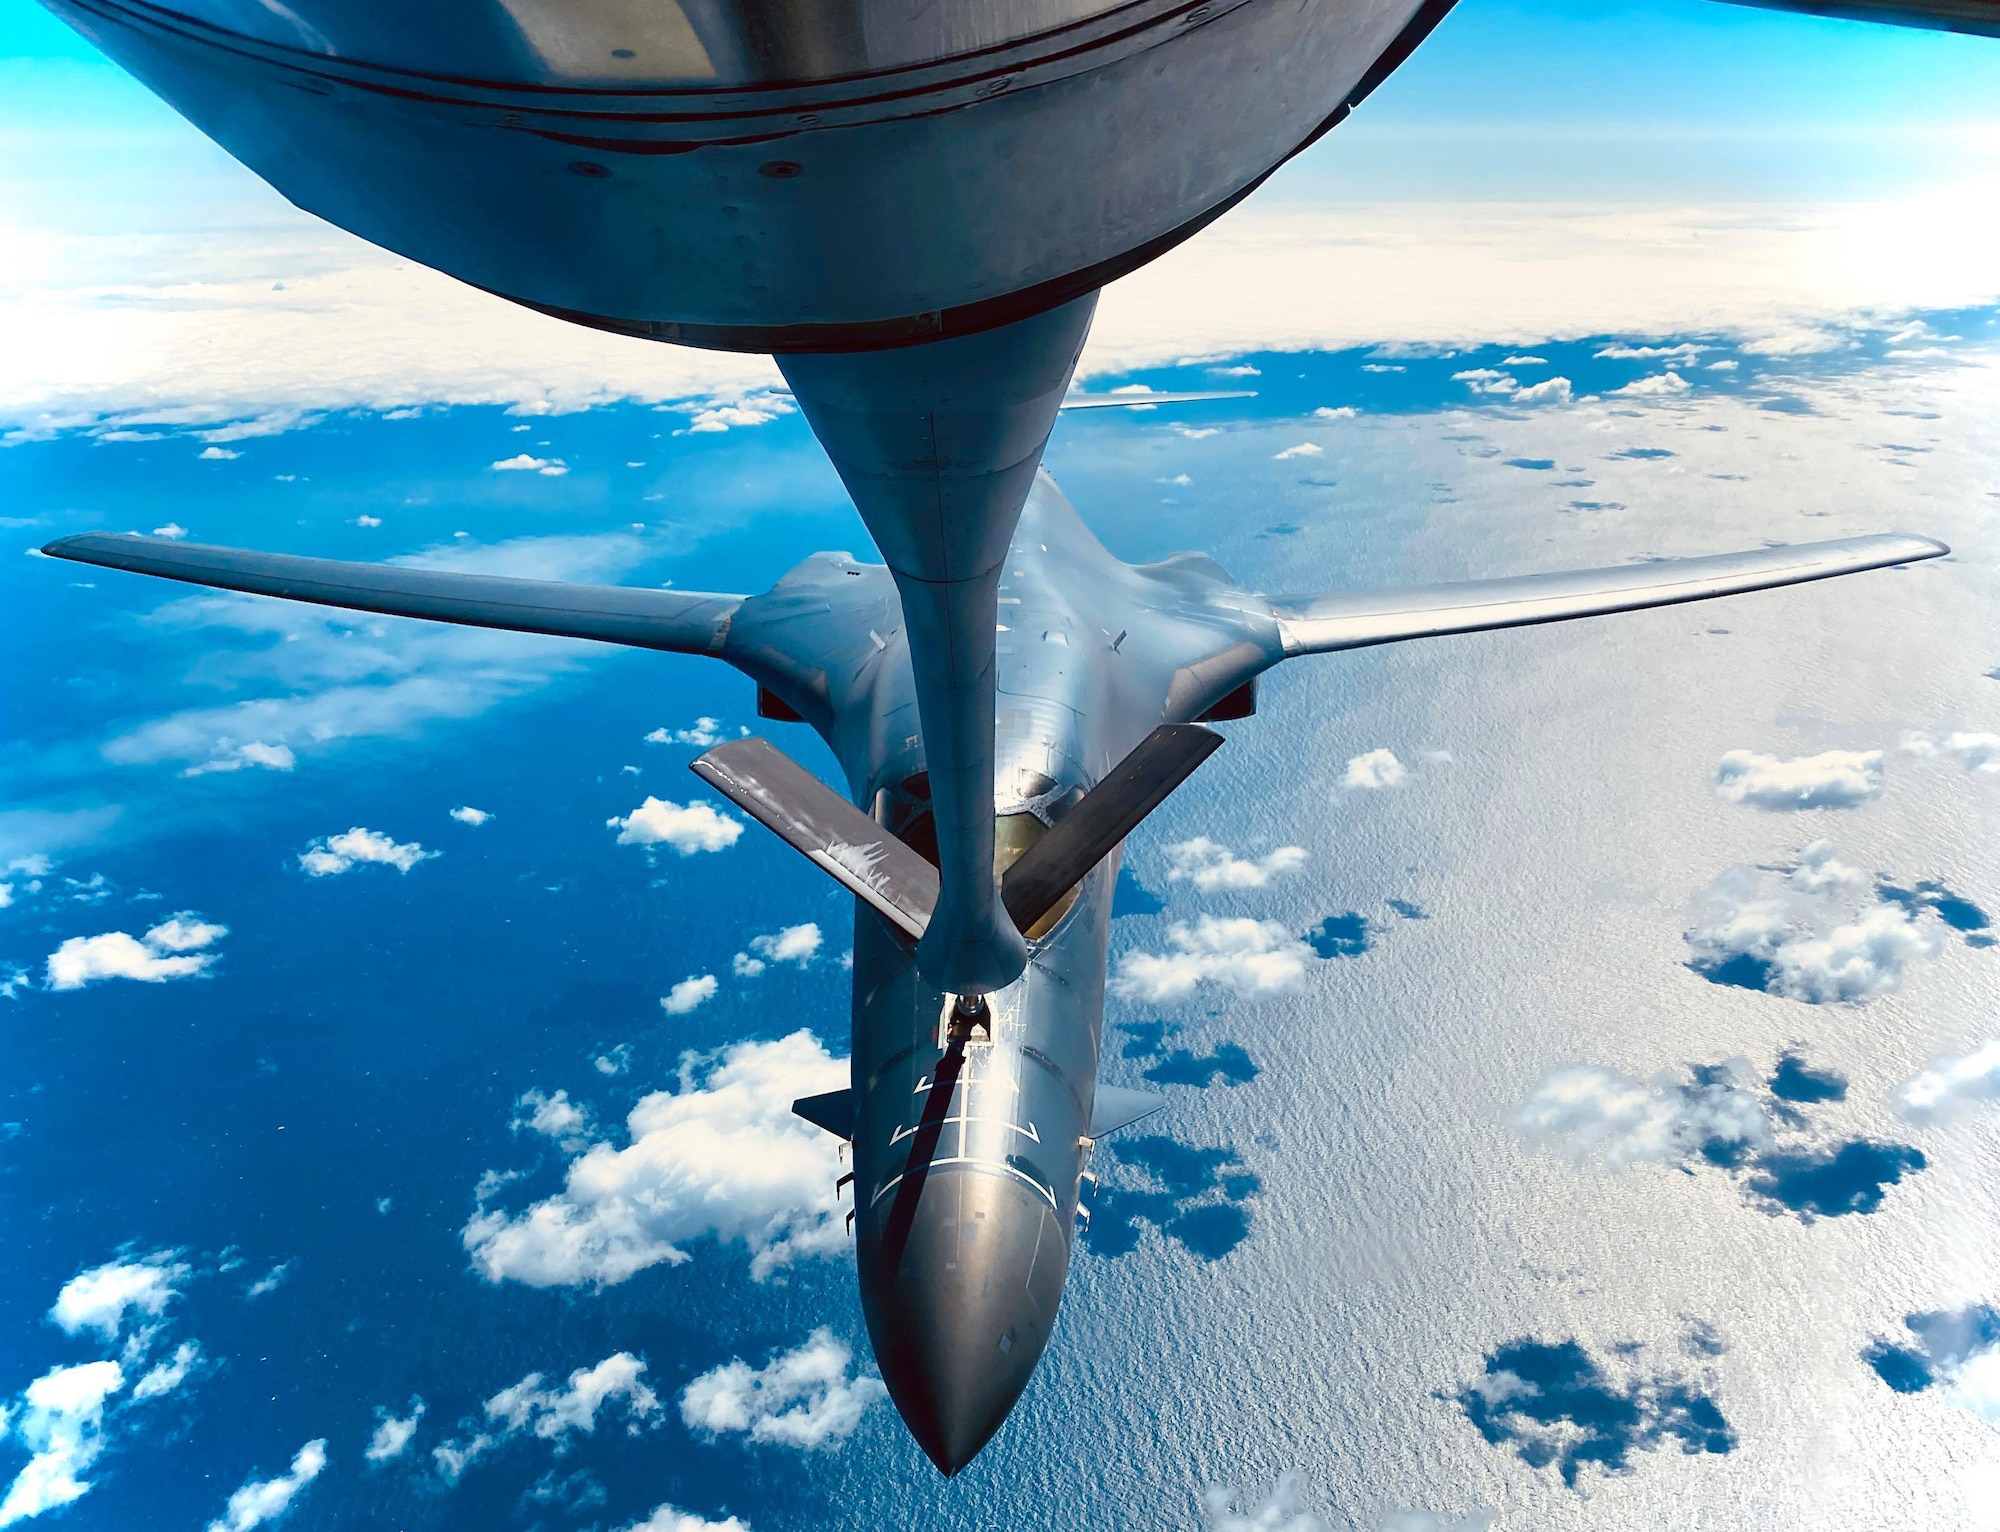 A B-1B Lancer from the 28th Bomb Wing, Ellsworth Air Force Base, South Dakota, receives fuel from a KC-135 Stratotanker from the 100th Air Refueling Wing, RAF Mildenhall, England, during a training mission for Bomber Task Force Europe over England, May 11, 2020. Bomber Task Force missions are intended to demonstrate U.S. commitment to the collective defense of the NATO alliance and are a visible demonstration of the U.S. capability of extended deterrence. (U.S. Air Force photo by Staff Sgt. Kelly O’Connor)